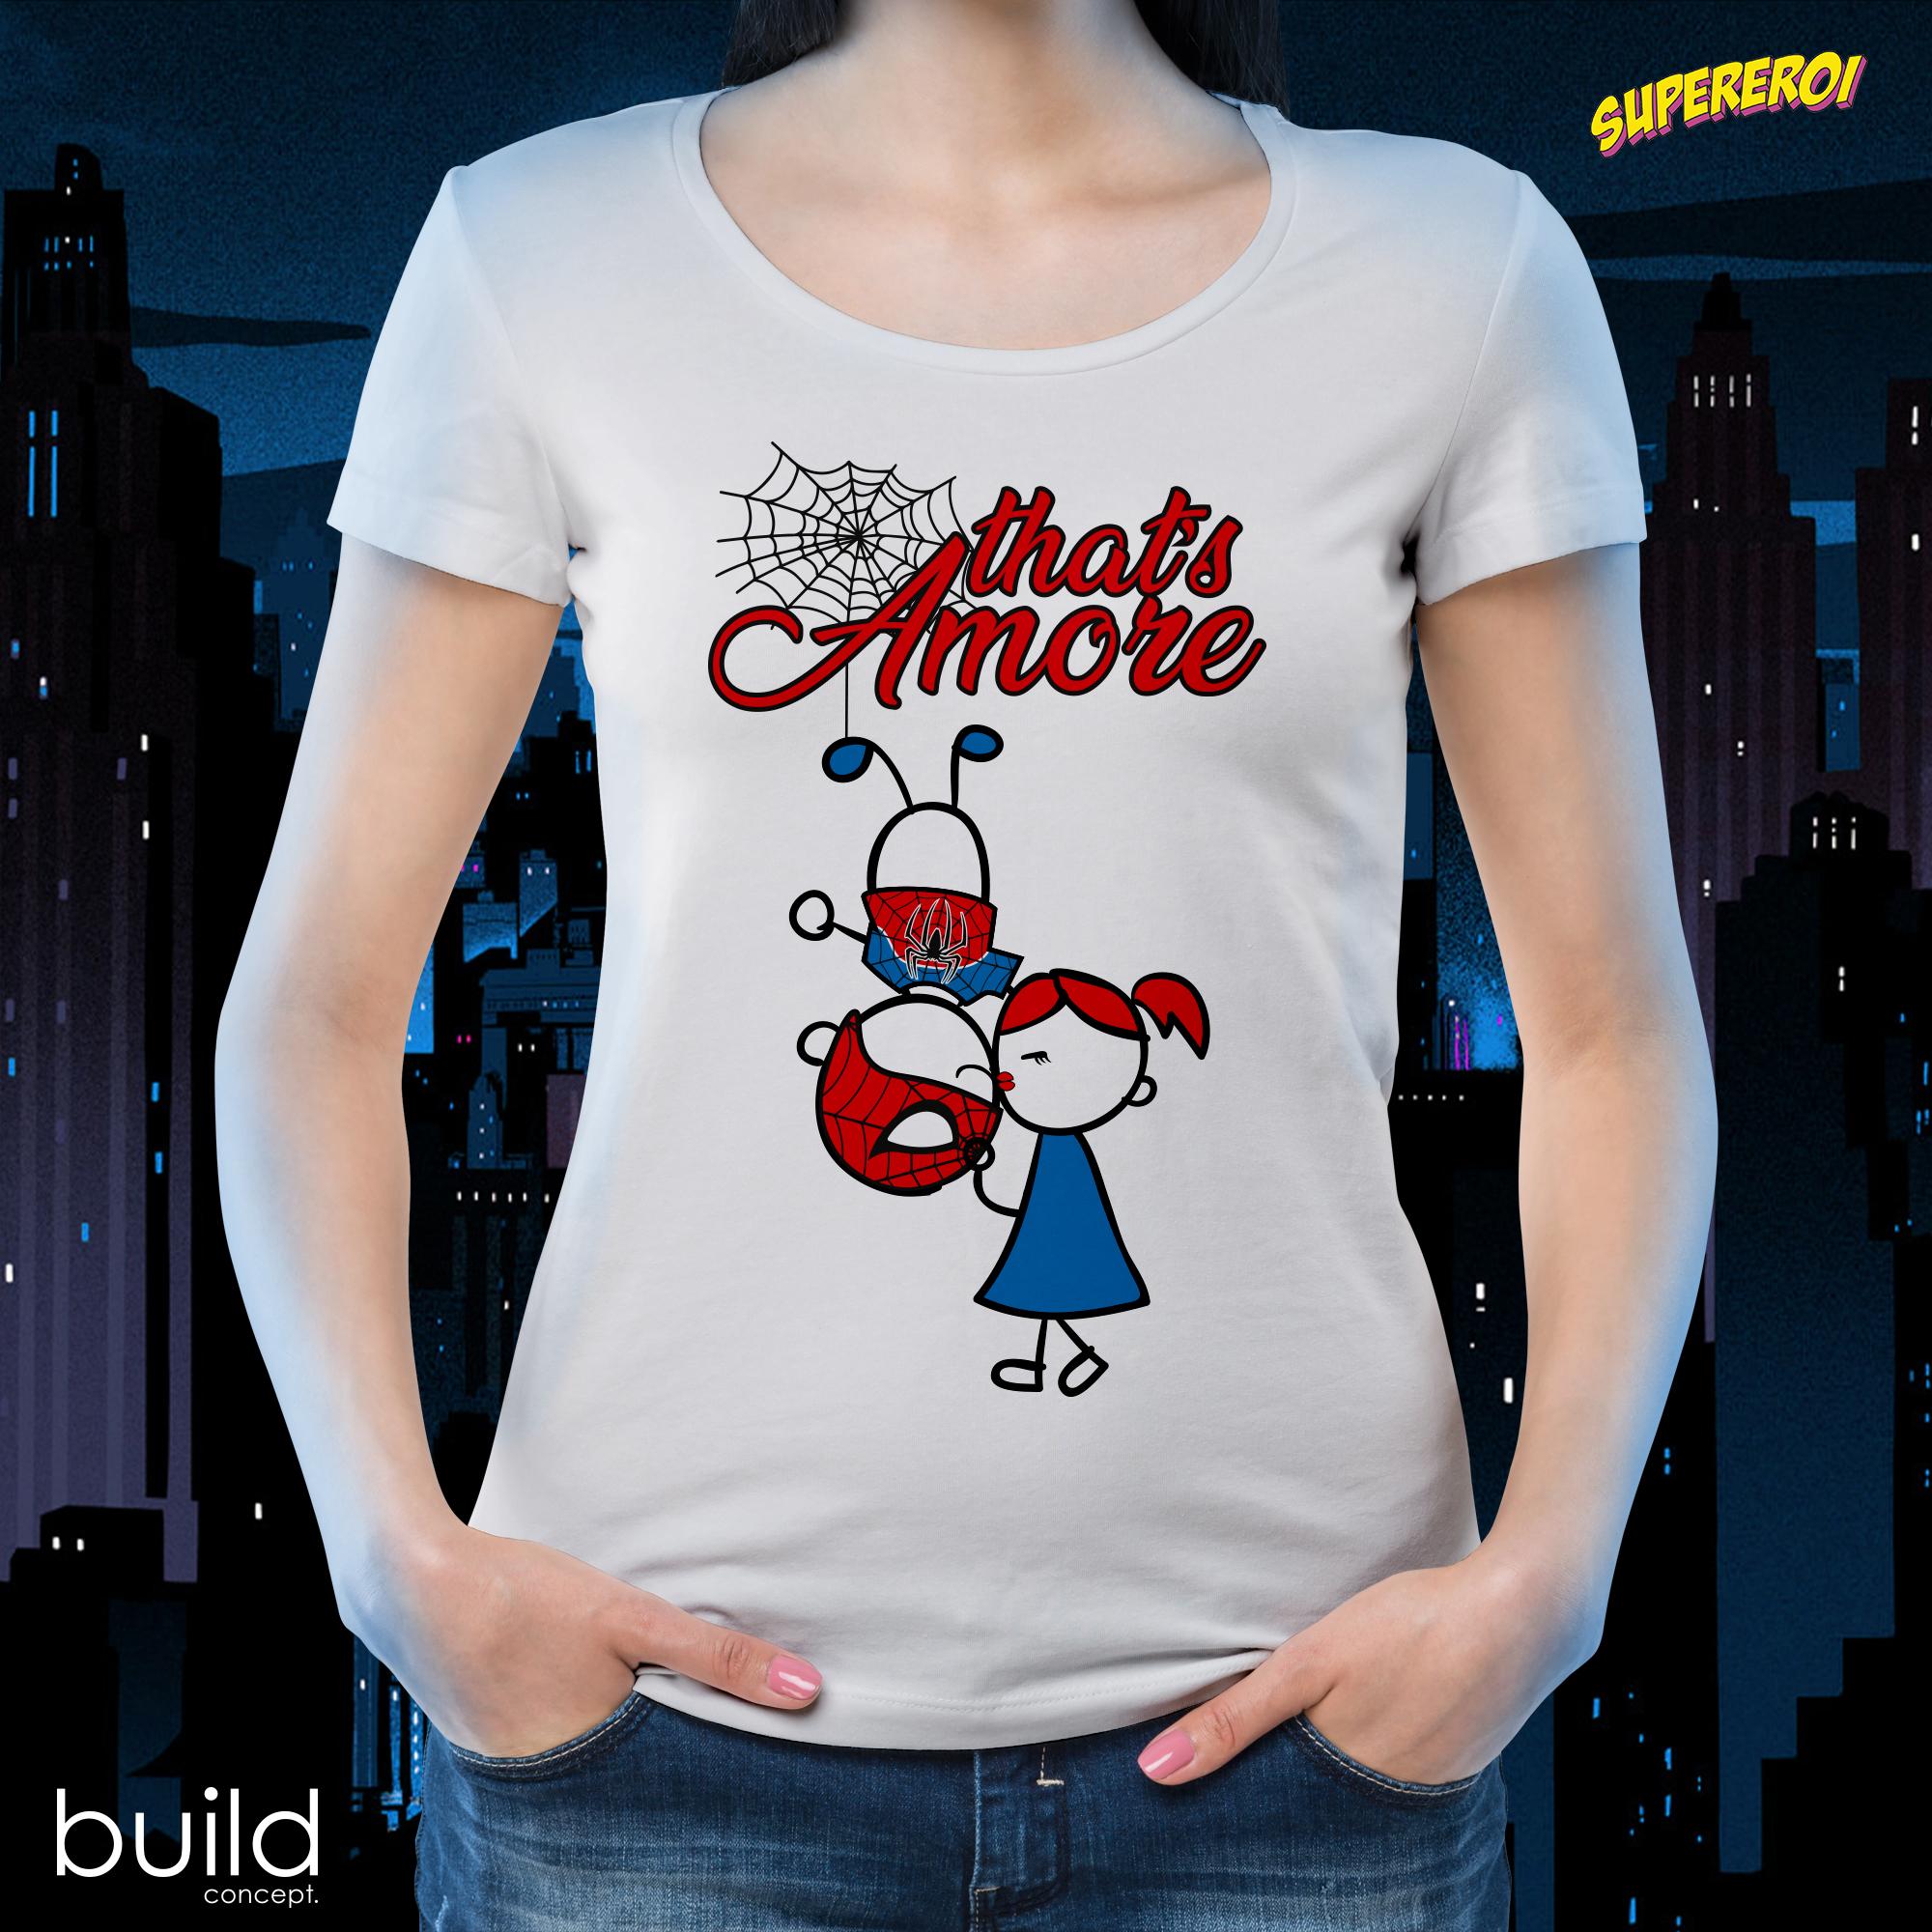 T-SHIRT - THAT'S AMORE DONNA